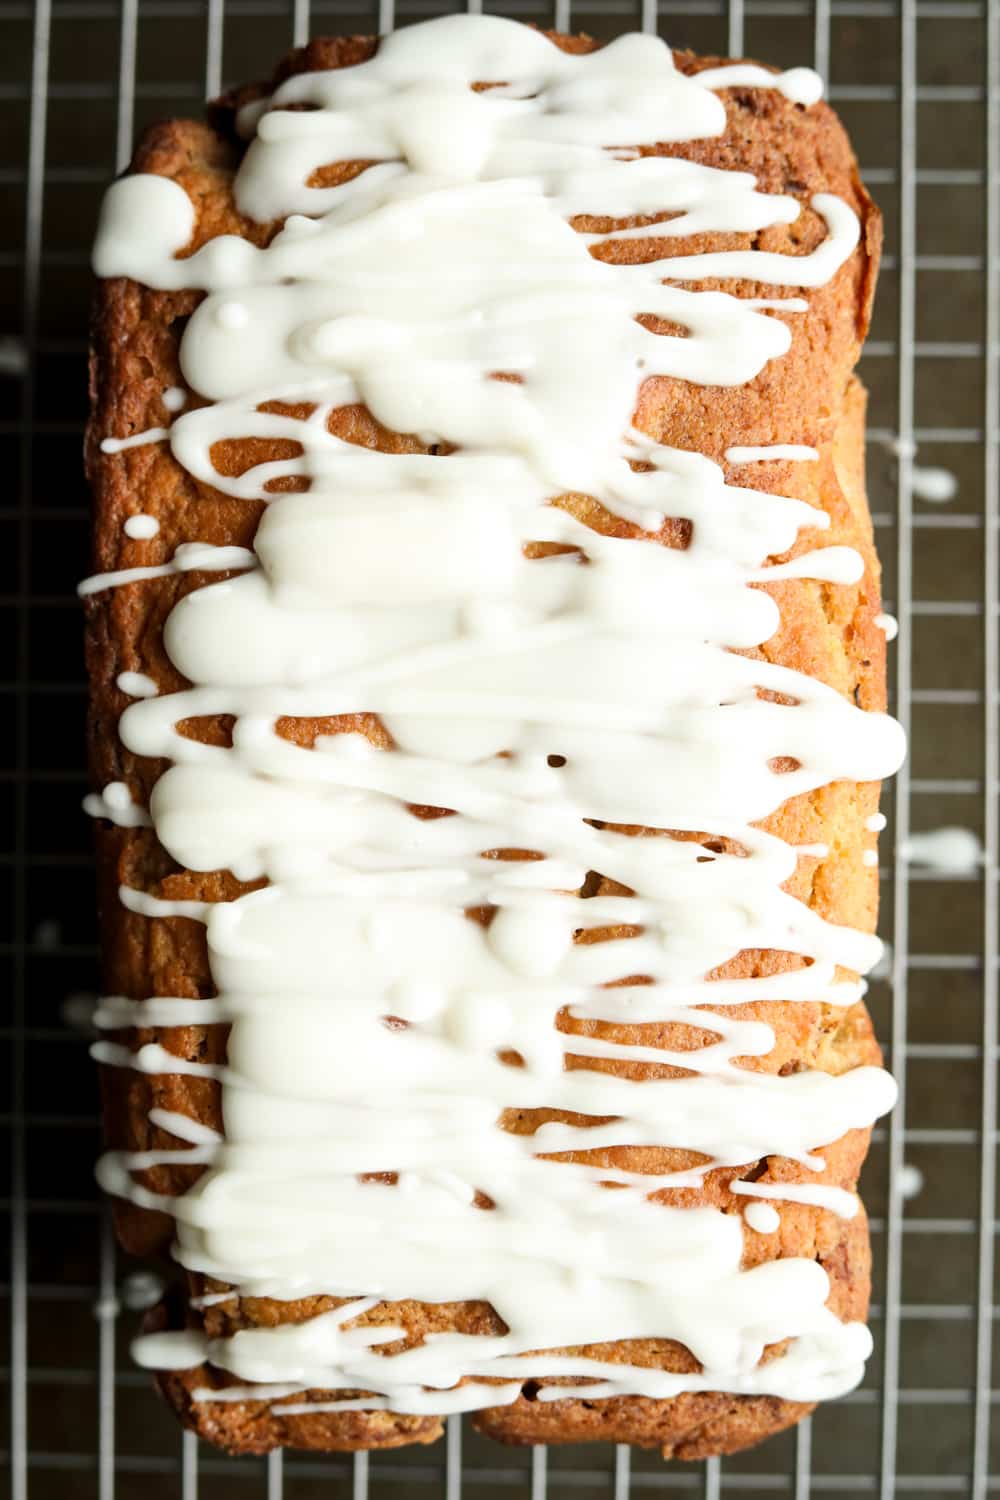 A loaf of cinnamon swirl bread that's been topped with a glaze. The bread is set on a wire drying rack.